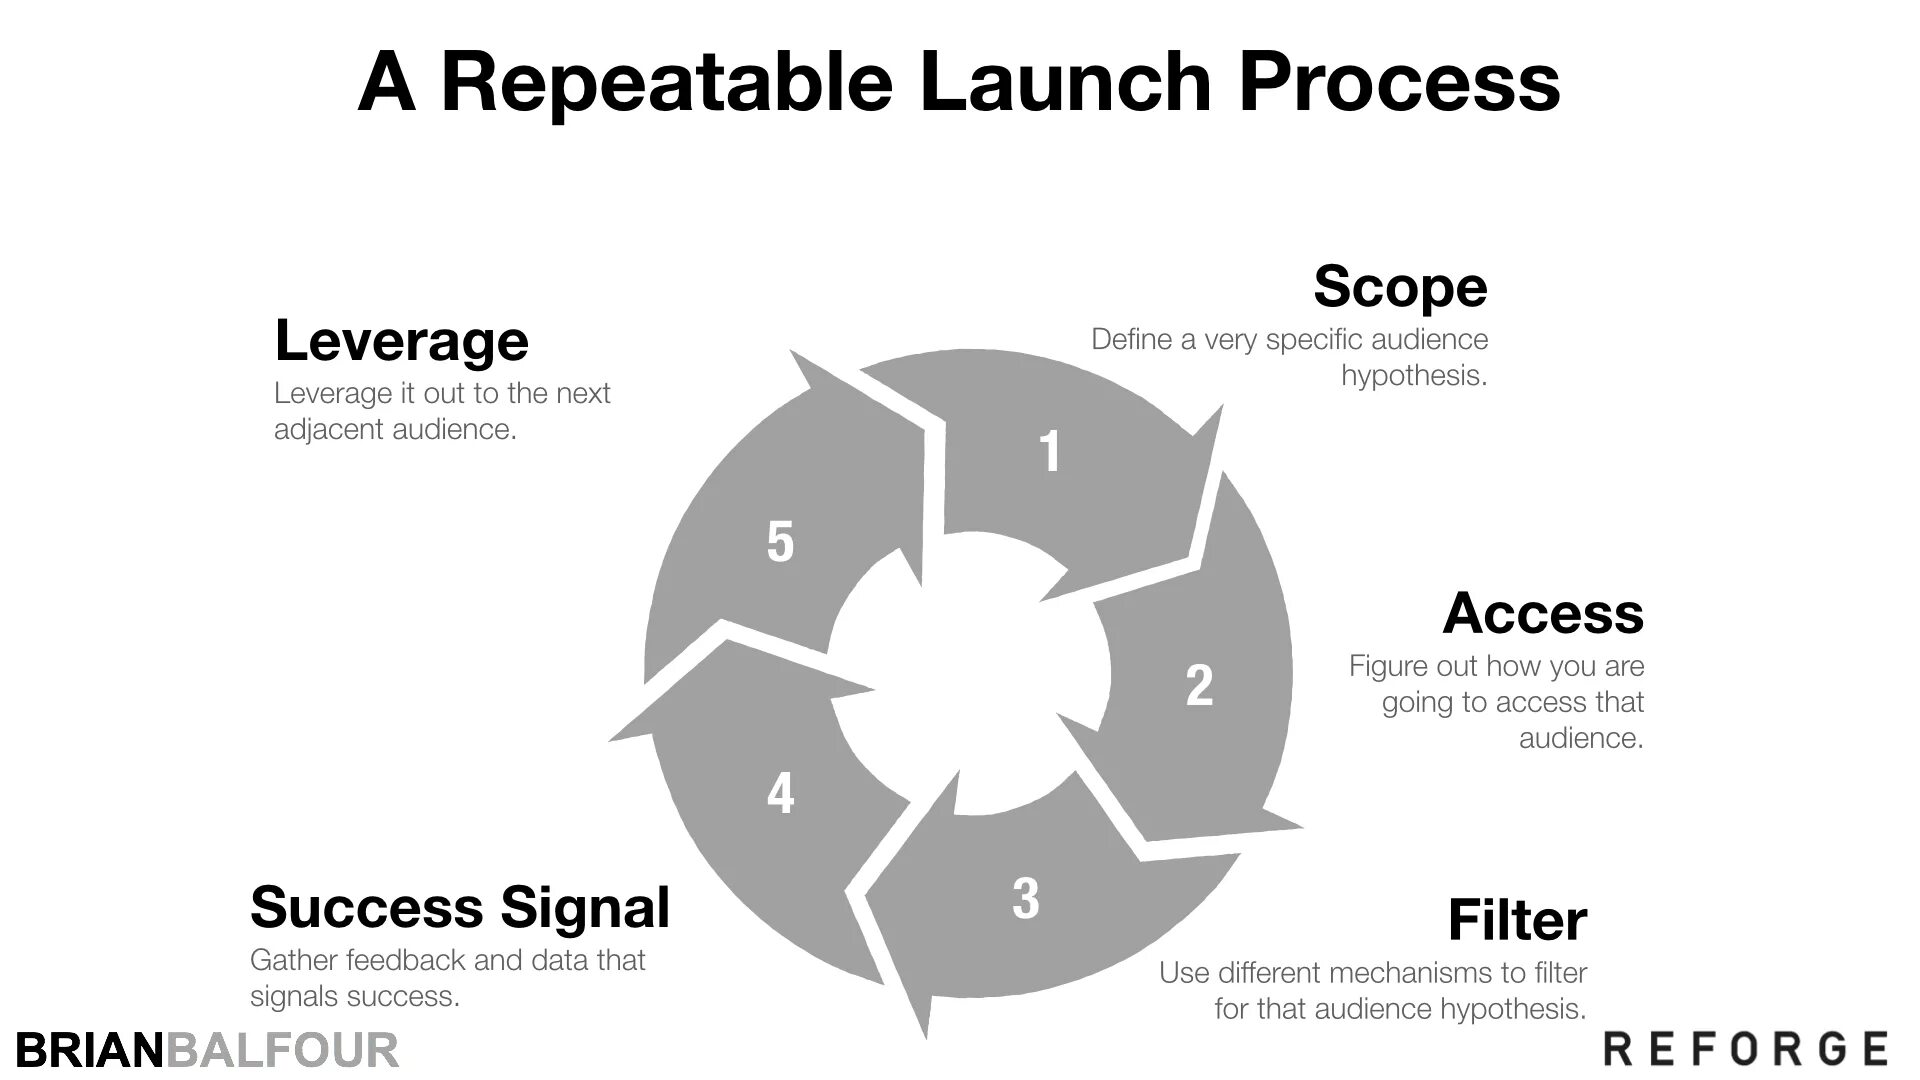 Process launcher c. Product Launch. Products Launch process. New product Launch steps. Strategic 5 AMS.